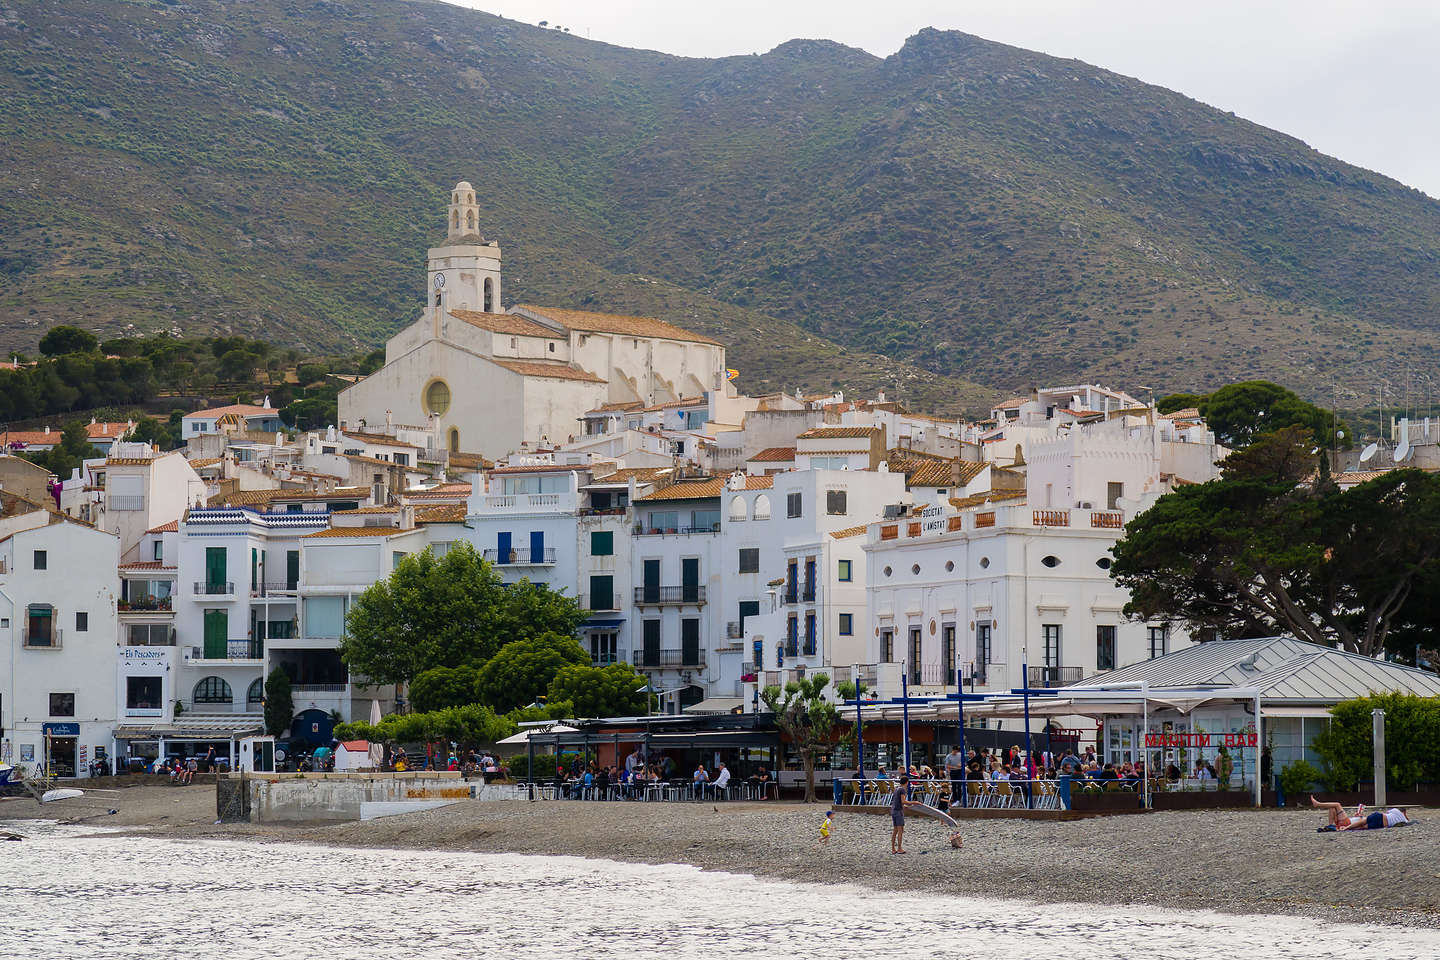 Cadaques - the most painted village in the world